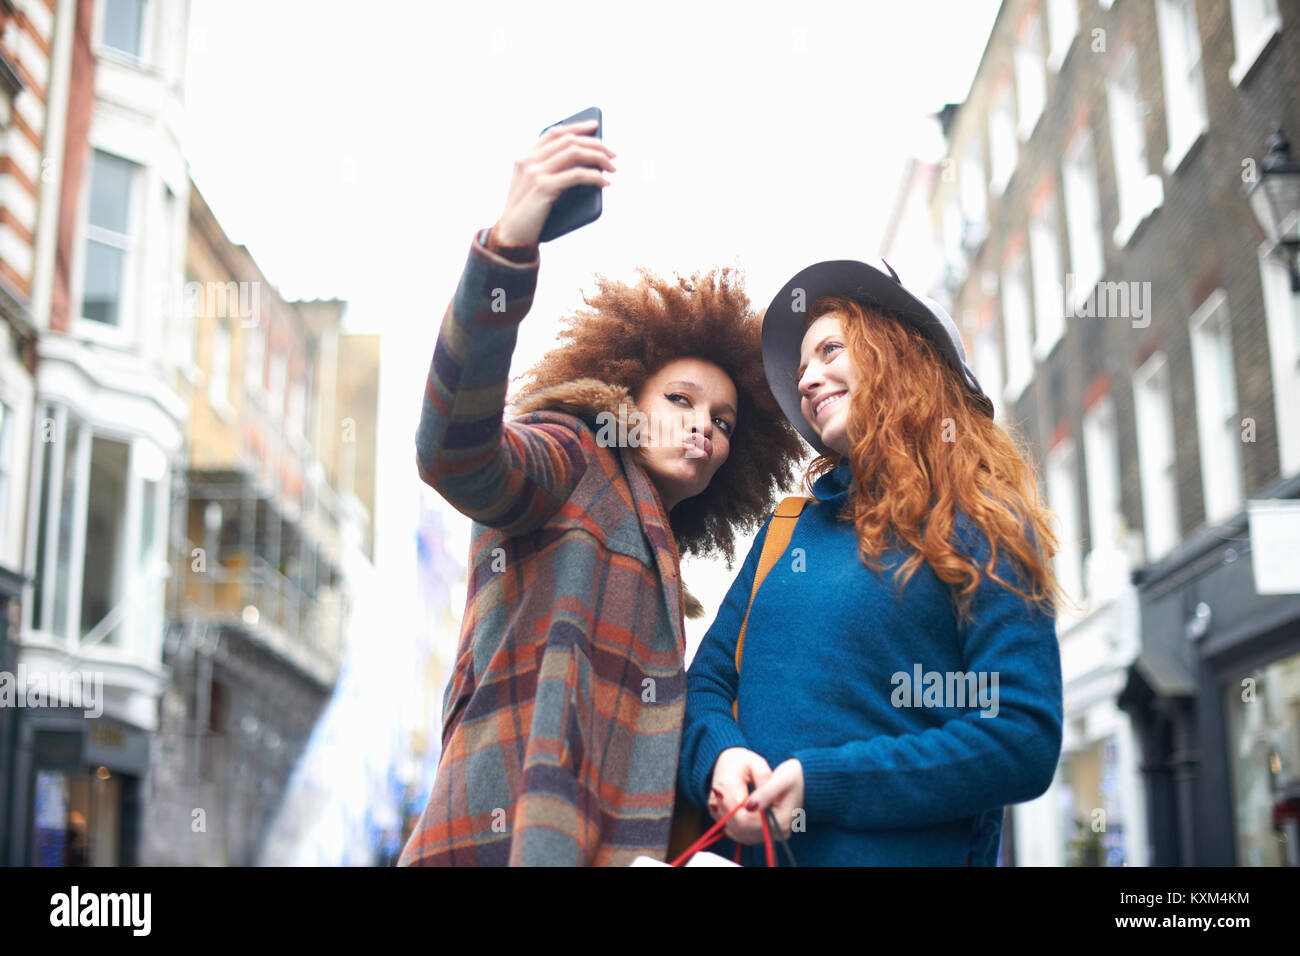 Two young women in street,taking selfie,using smartphone,low angle view Stock Photo